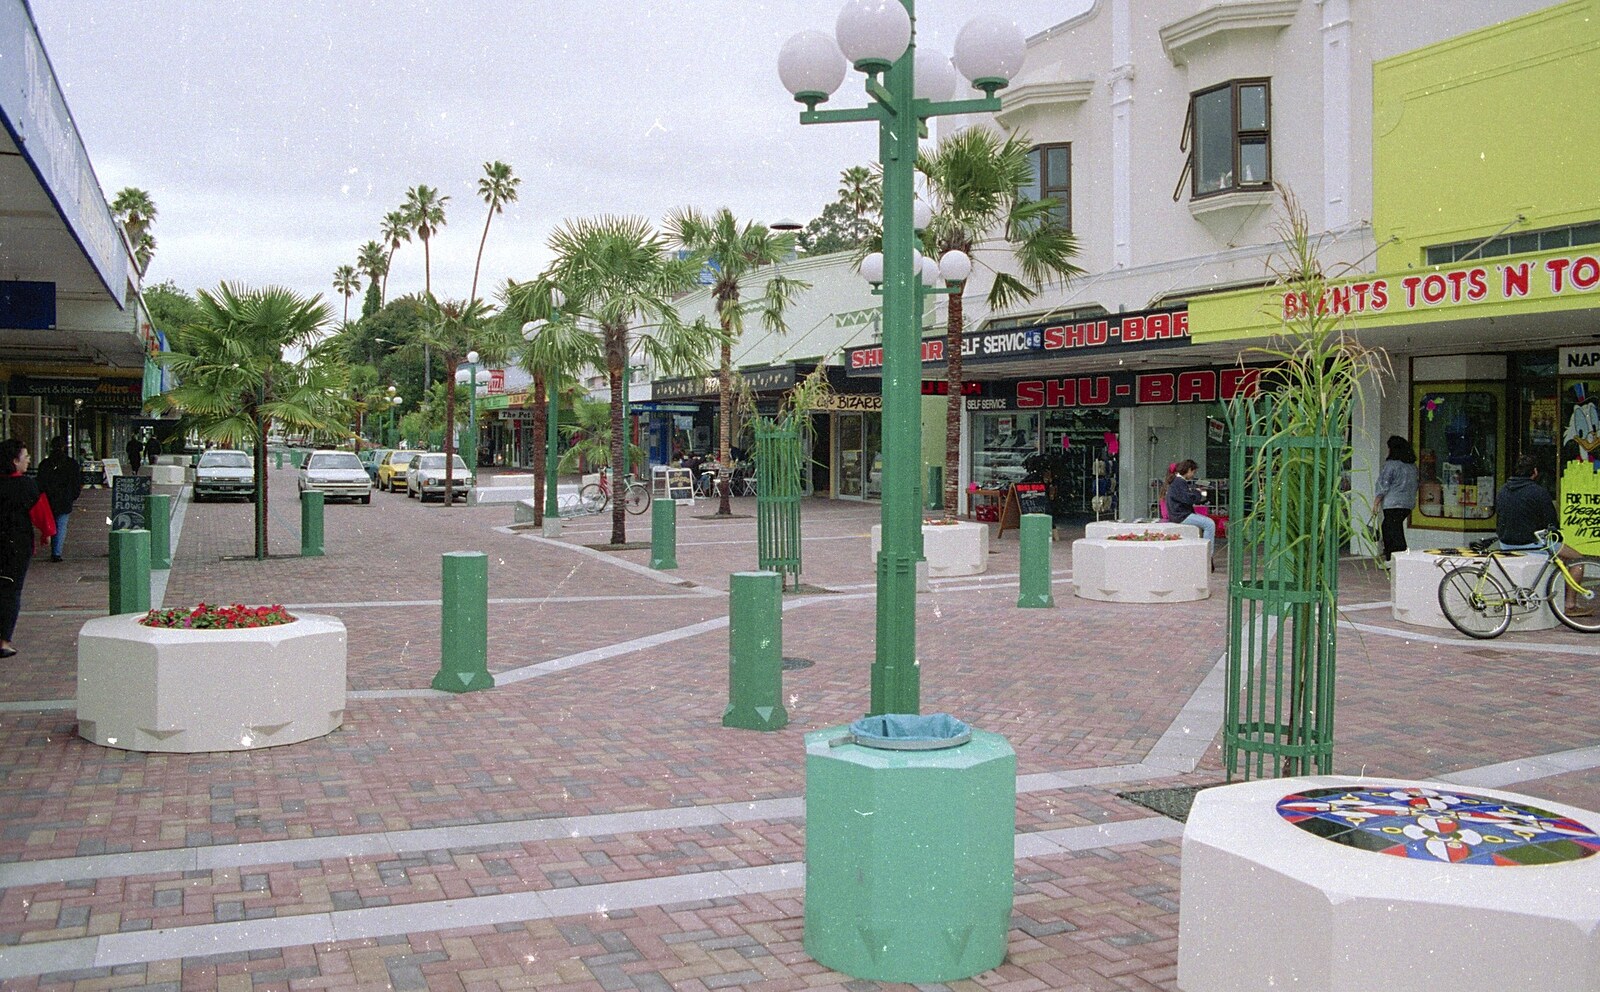 A pedestrian zone in Napier from A Road-trip Through Rotorua to Palmerston, North Island, New Zealand - 27th November 1992